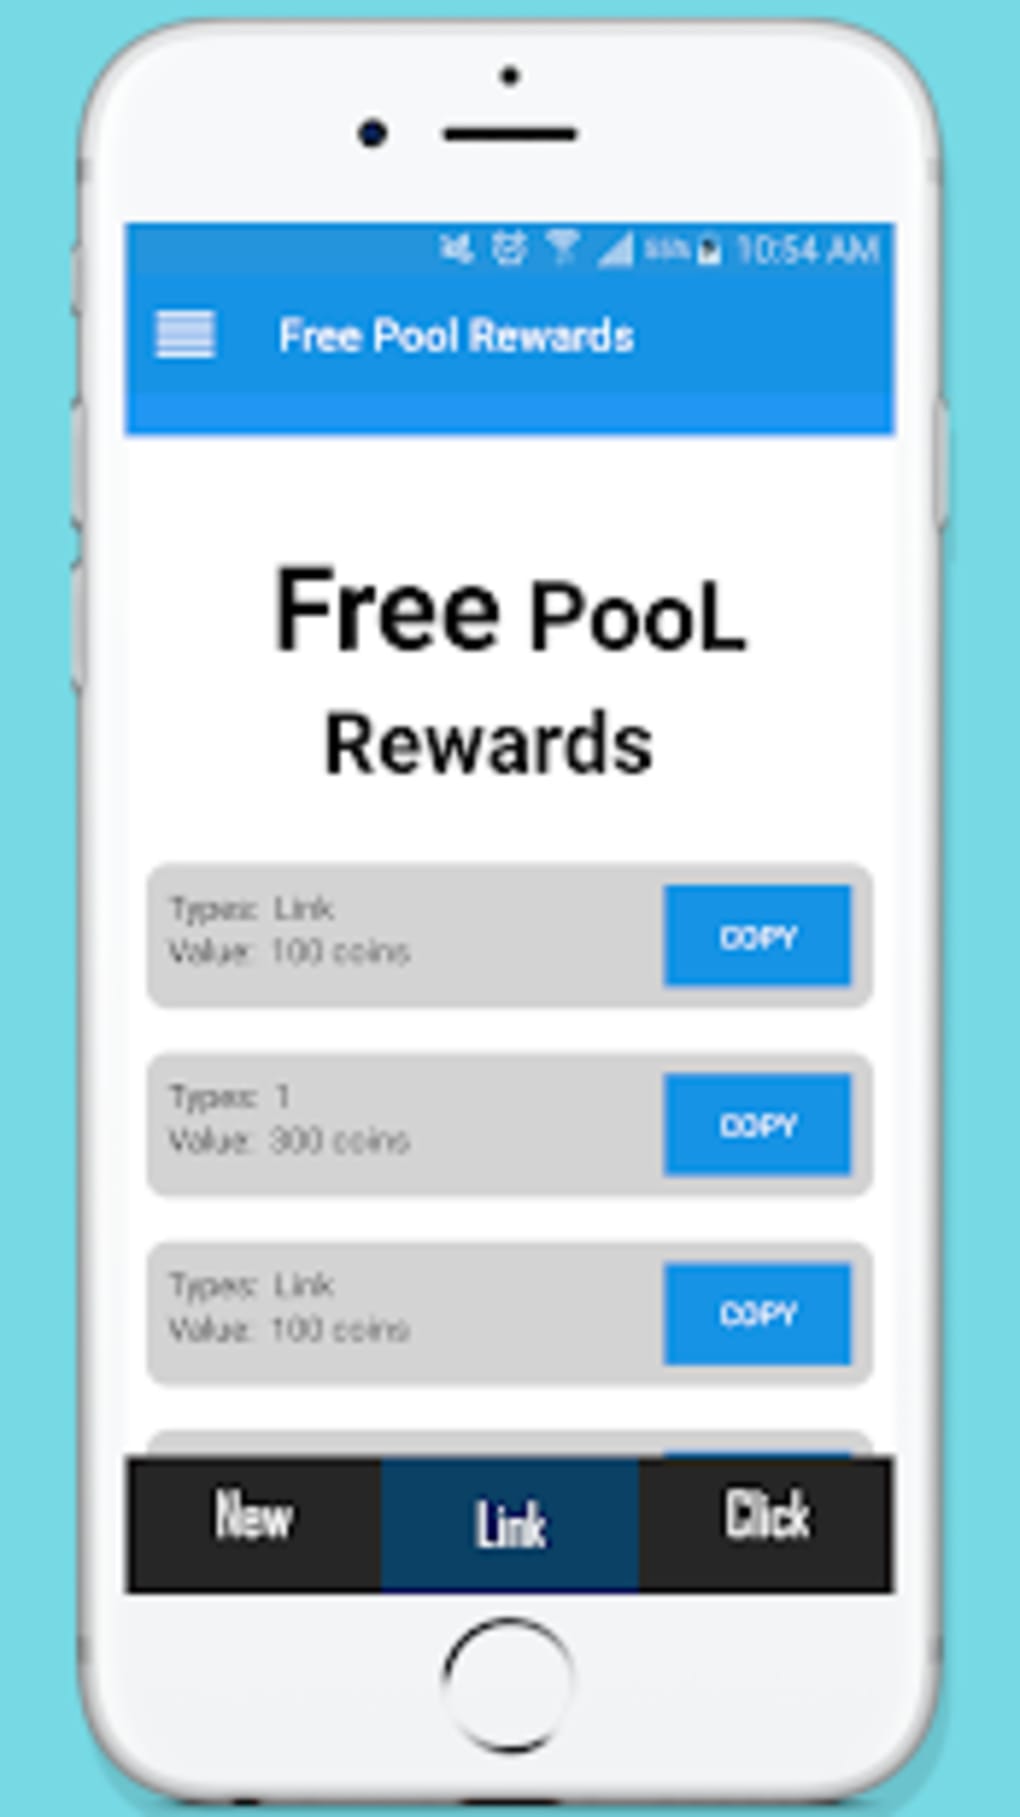 8 Ball Pool Free Coins And Rewards Links (February ) - Today Free Coins